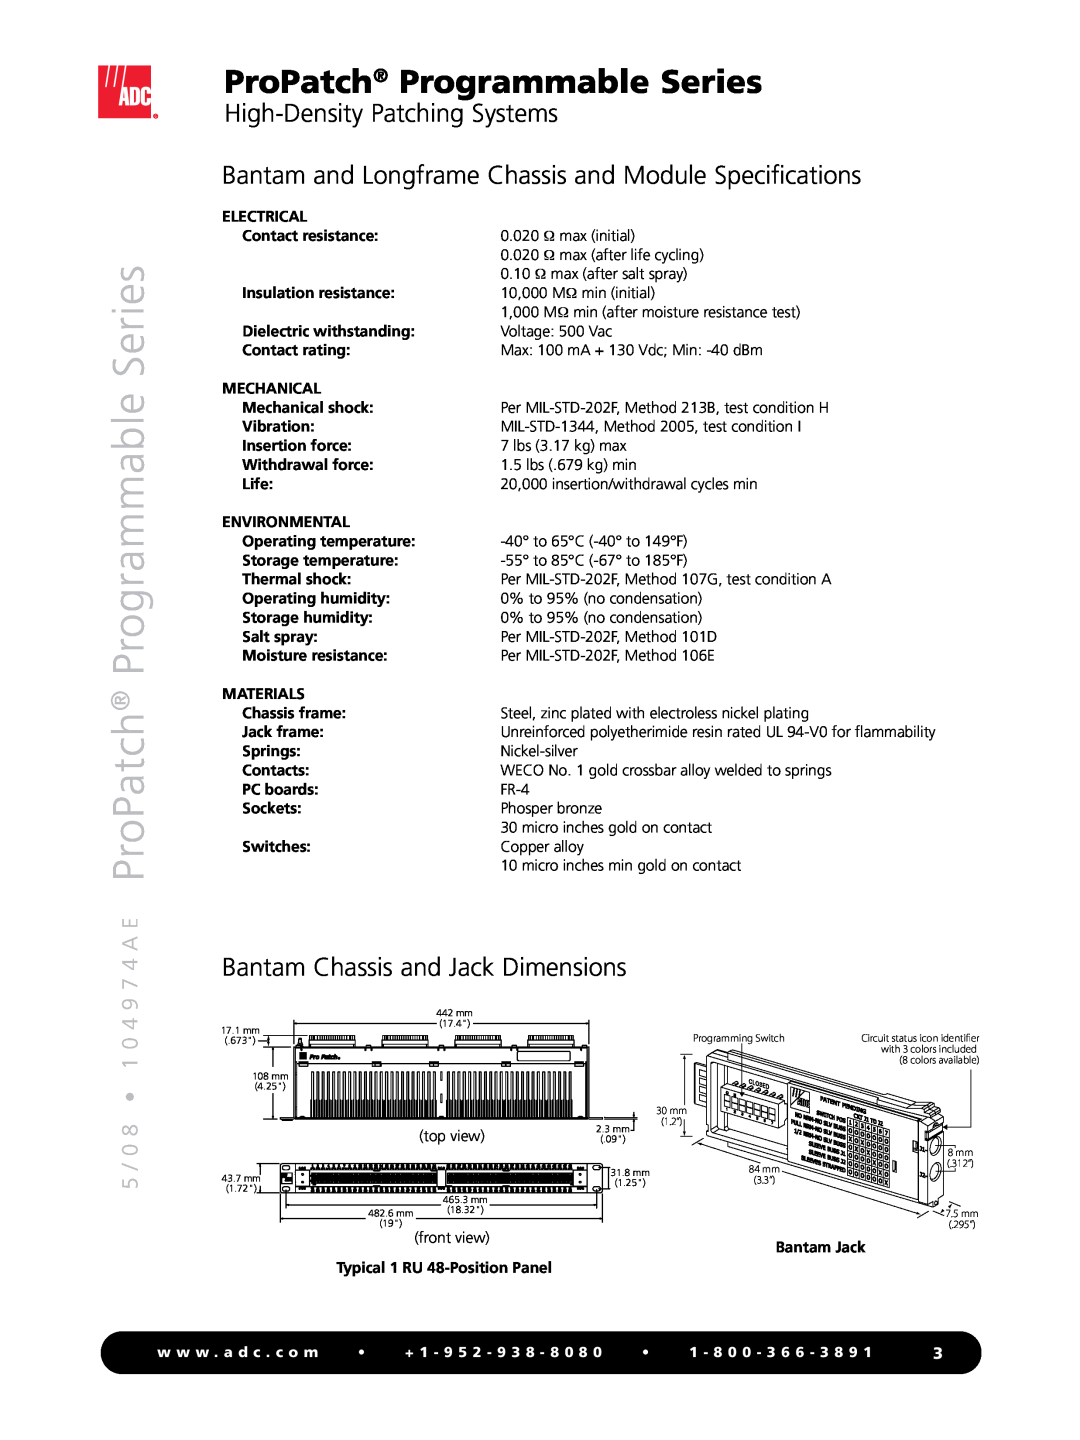 ADC manual 5 / 0 8 1 0 4 9 7 4 A E ProPatch Programmable Series, High-Density Patching Systems, w w w . a d c . c o m 